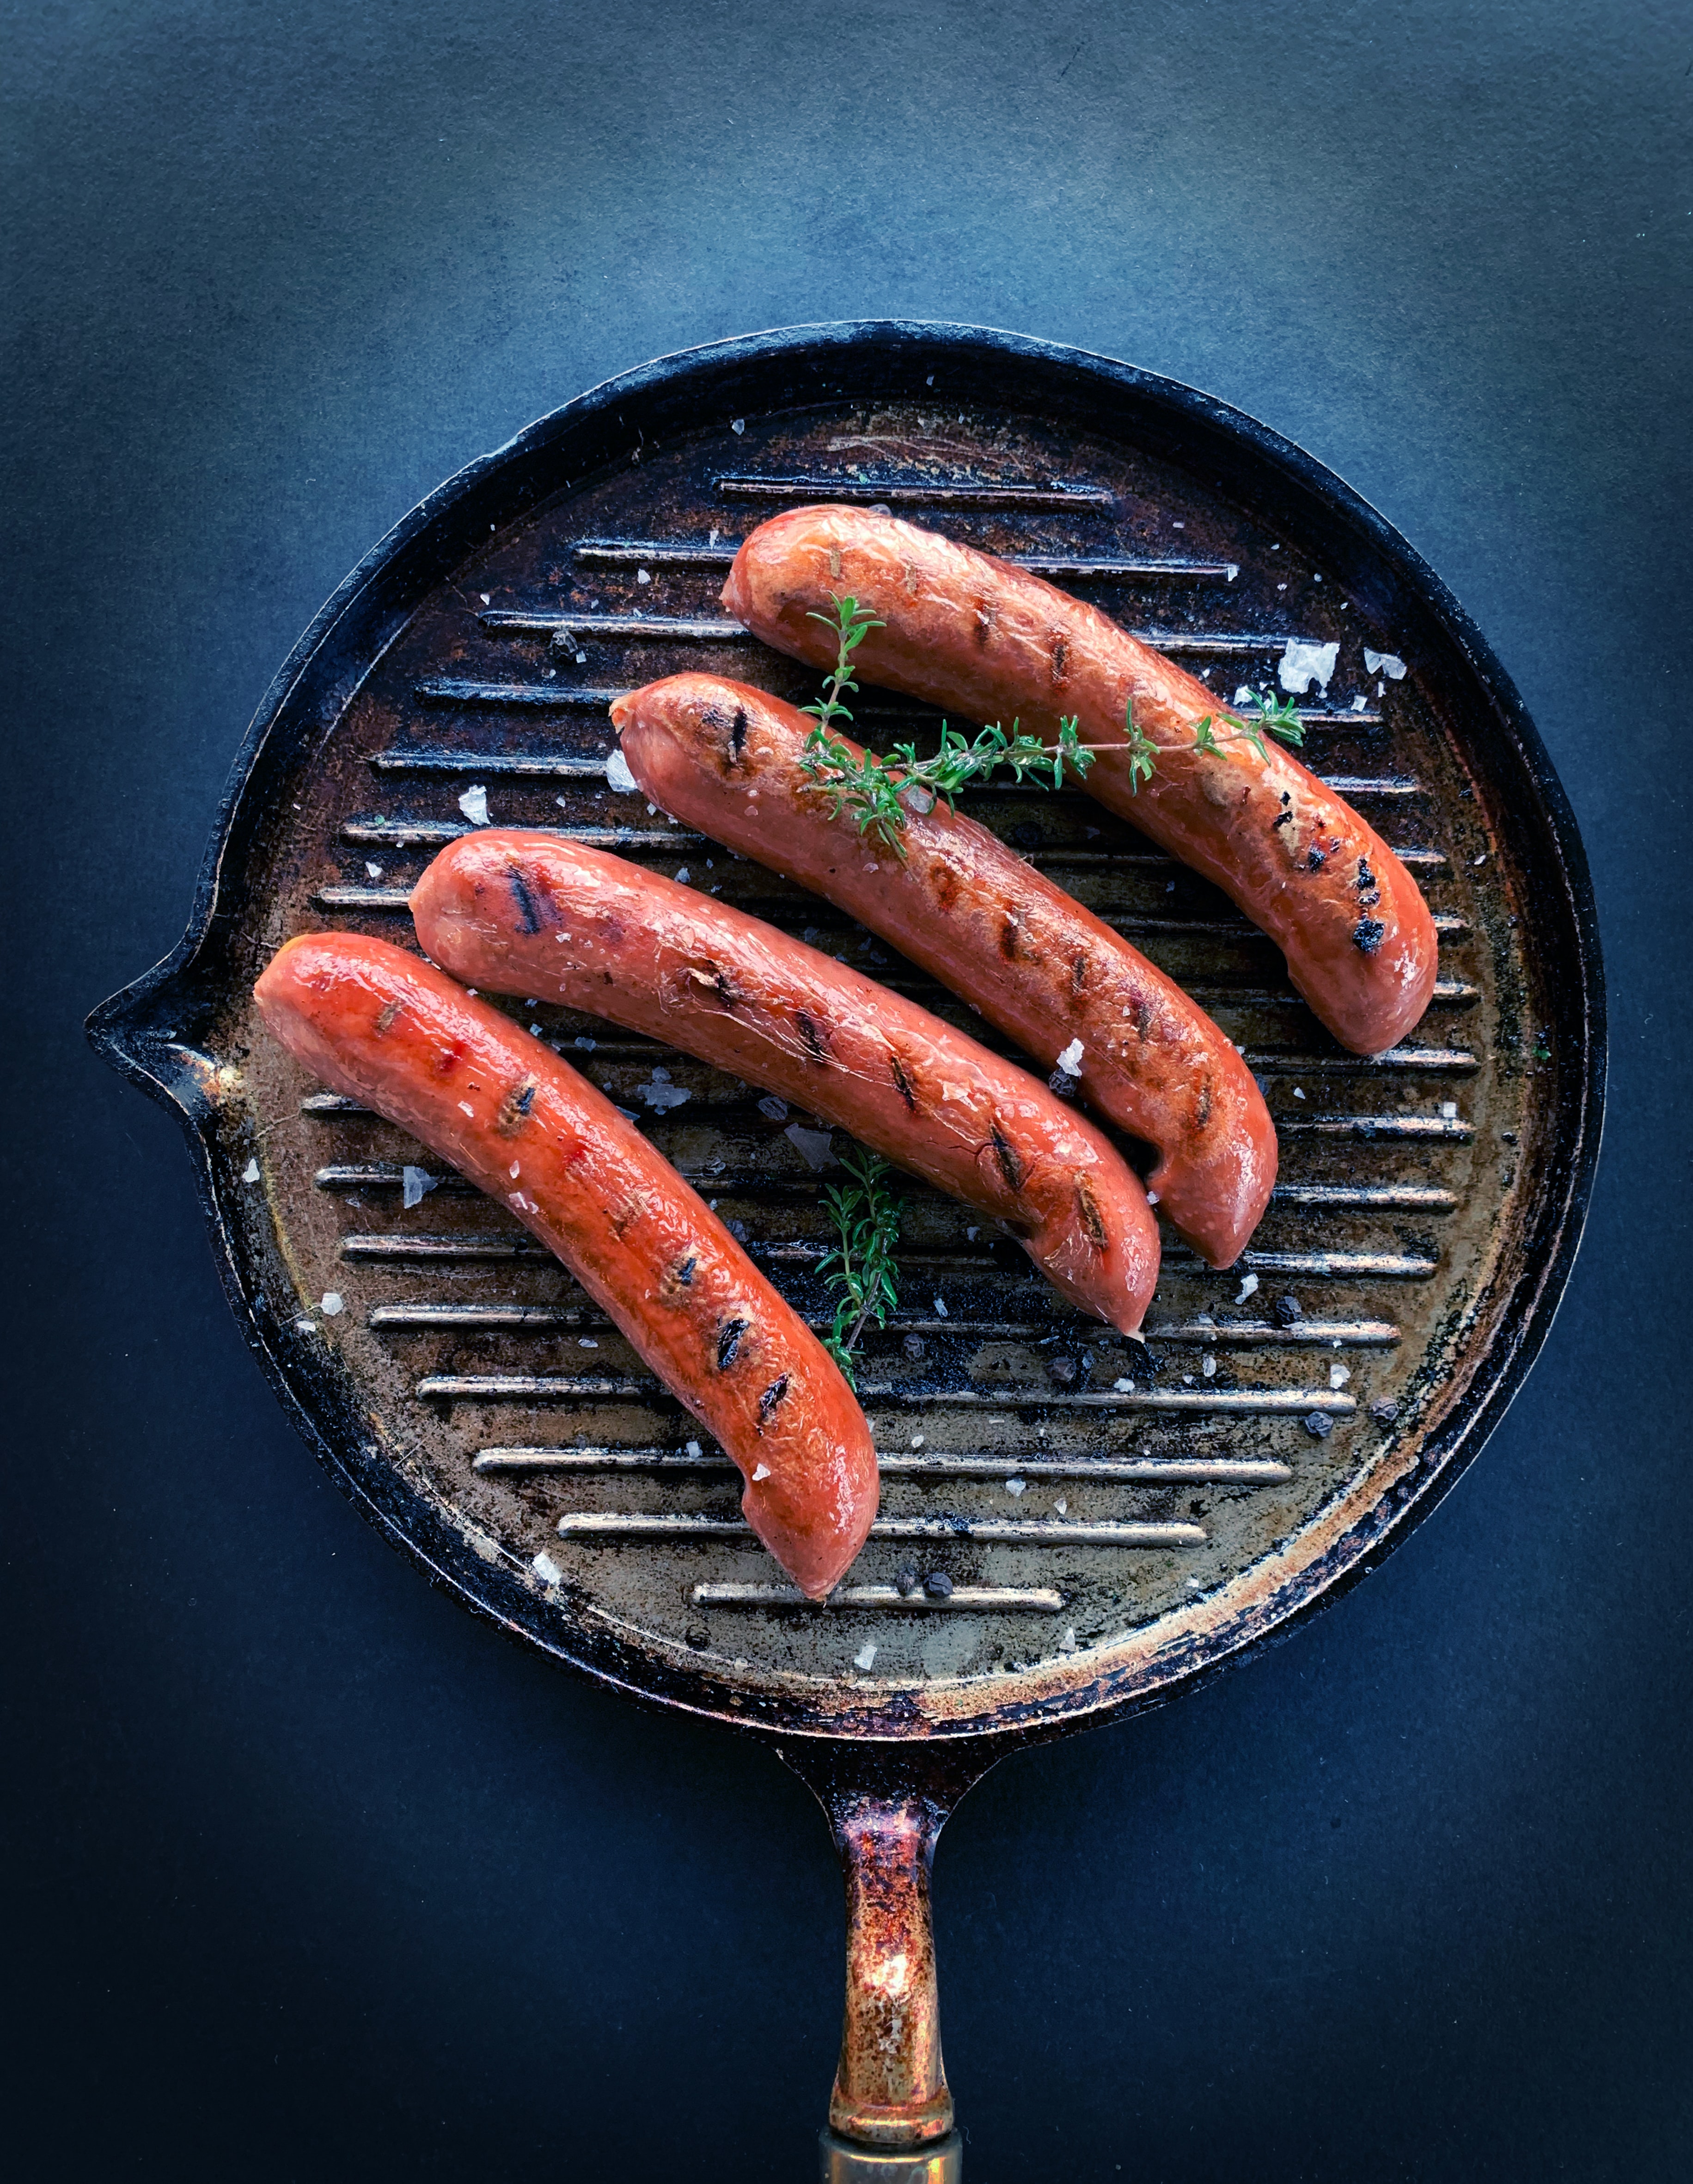 Sausages on Grill